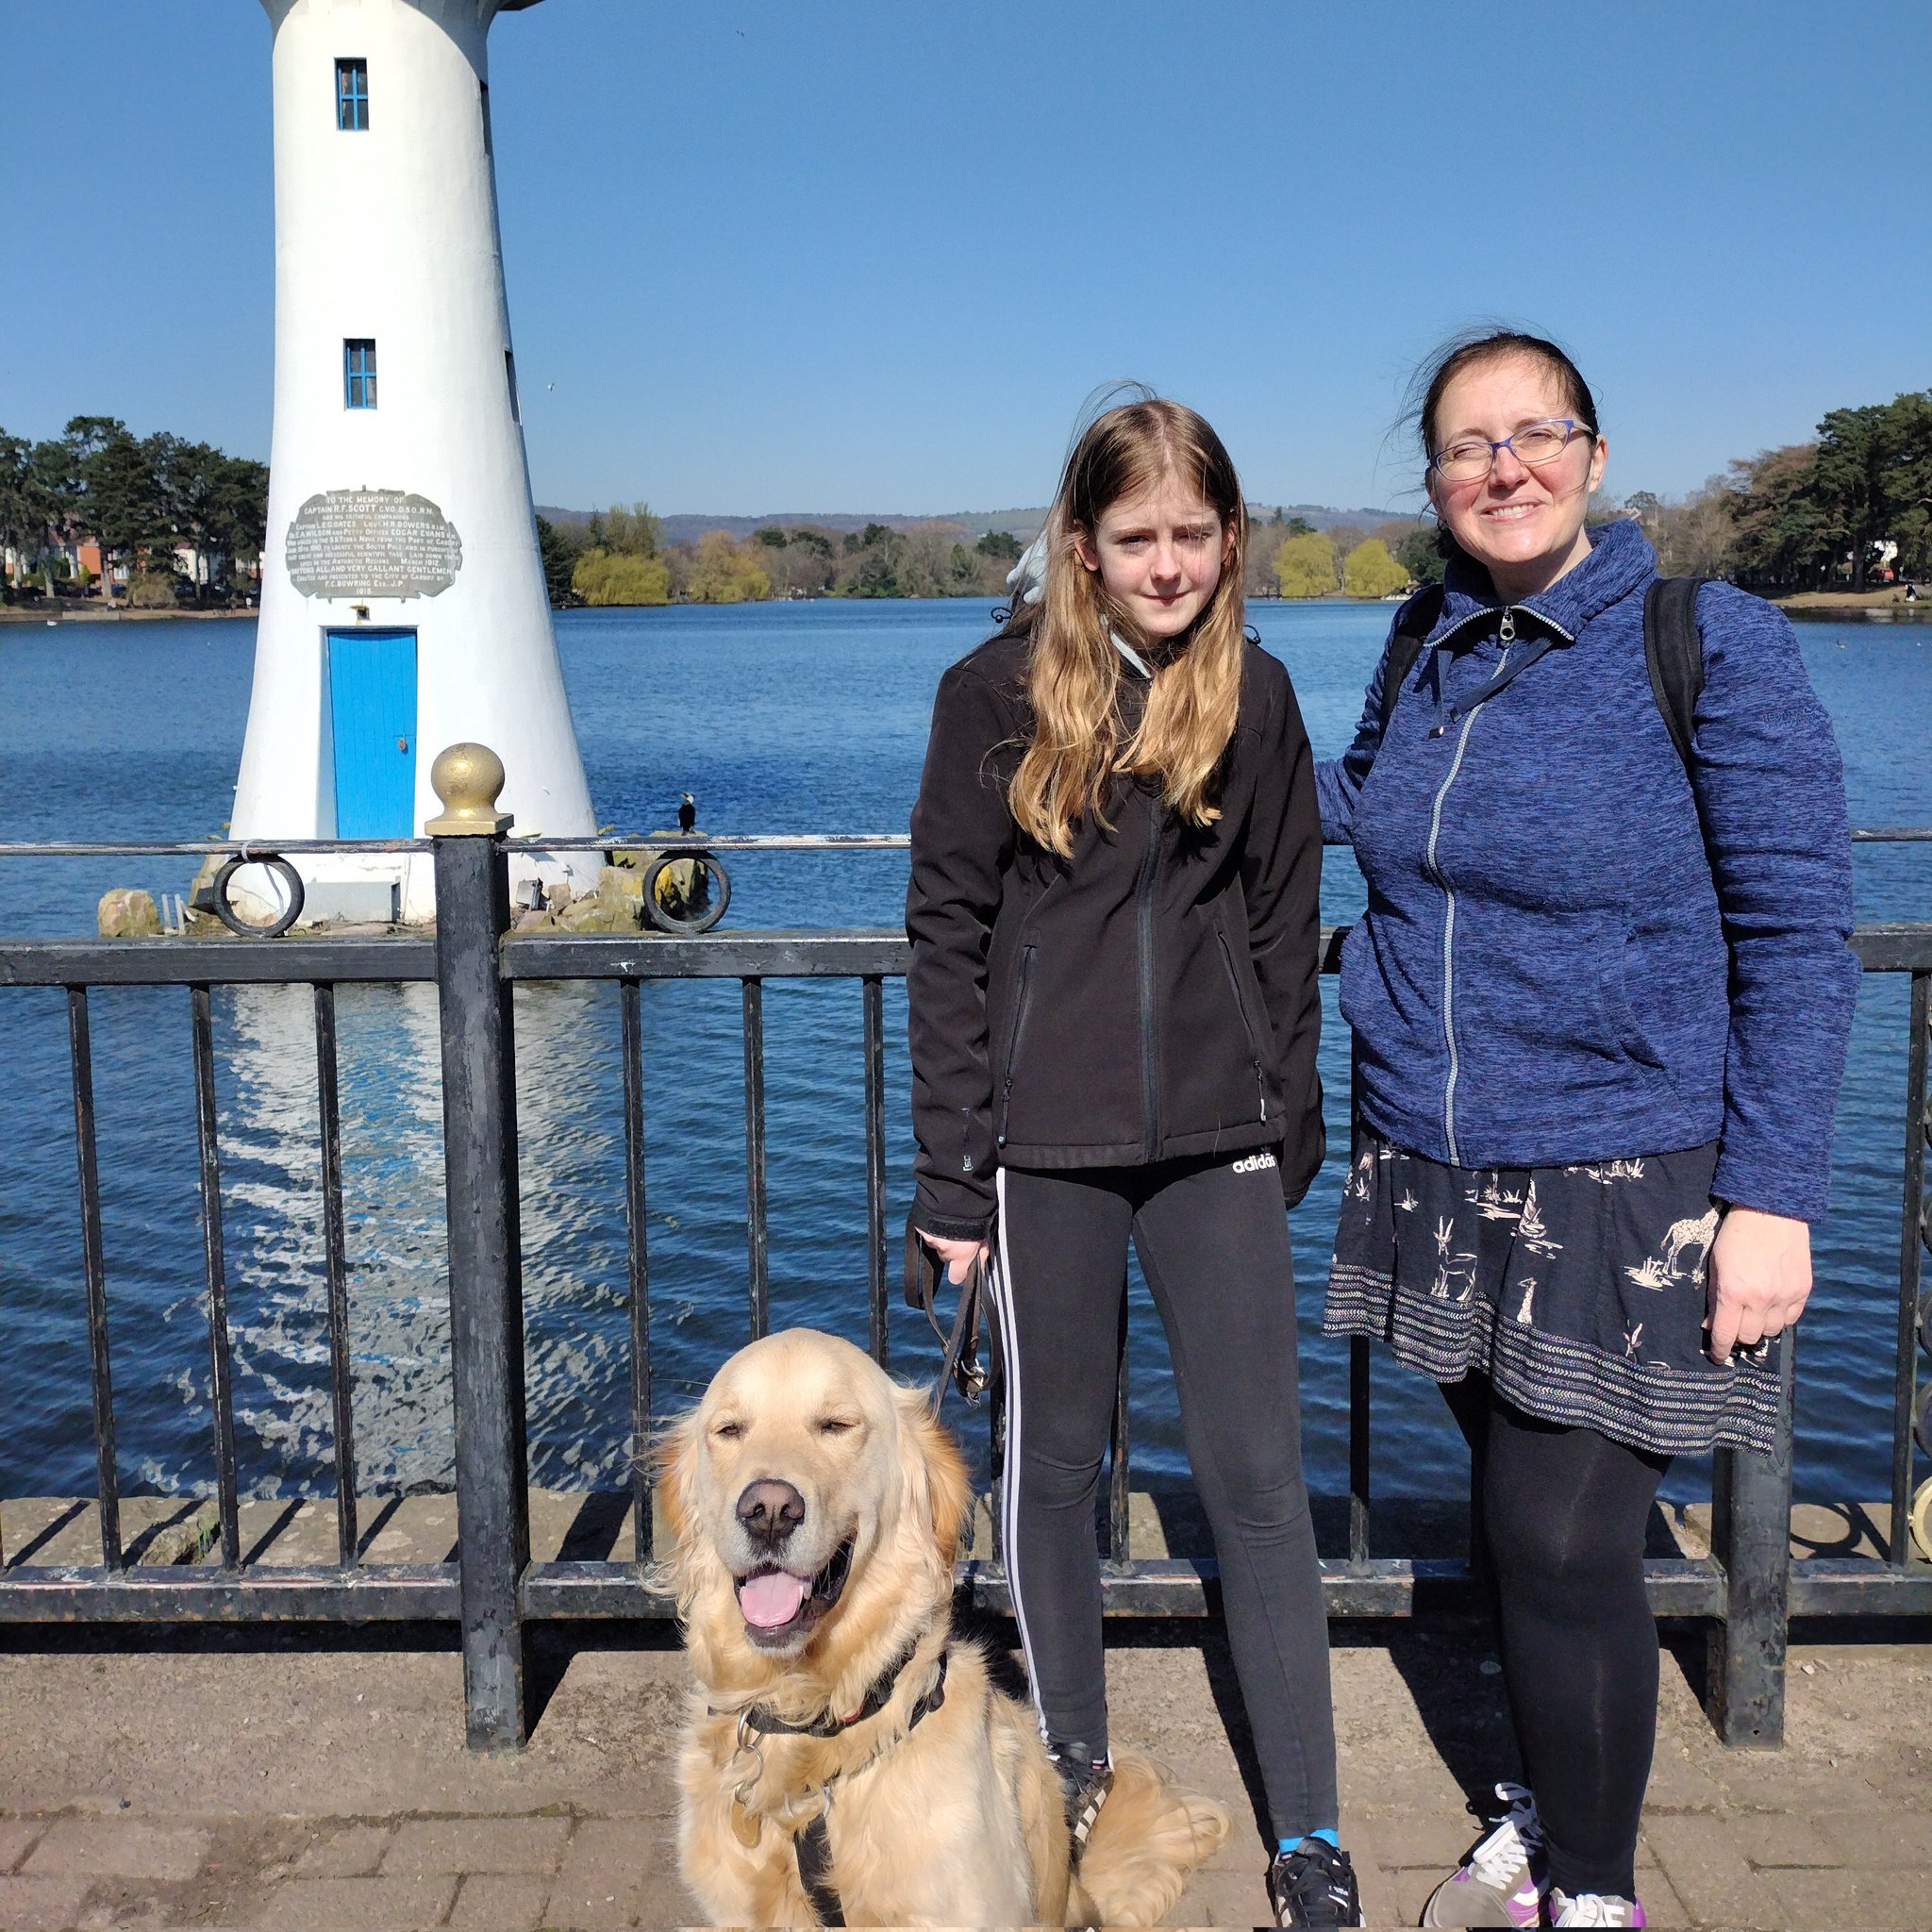 Catrin and Gwennan Young stood on a sunny pier with a lighthouse in the background. Catrin has got their furry companion buddy sat nearby.